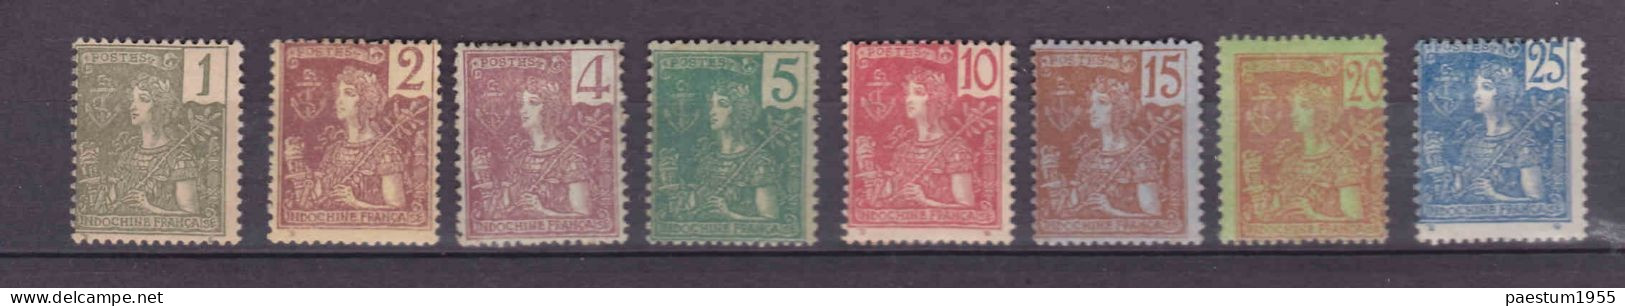 INDOCHINE - Lot 8 Timbres Neuf* 1904 - 1906  Type Grasset FR-IC 24 - FR-IC 31 - Unused Stamps